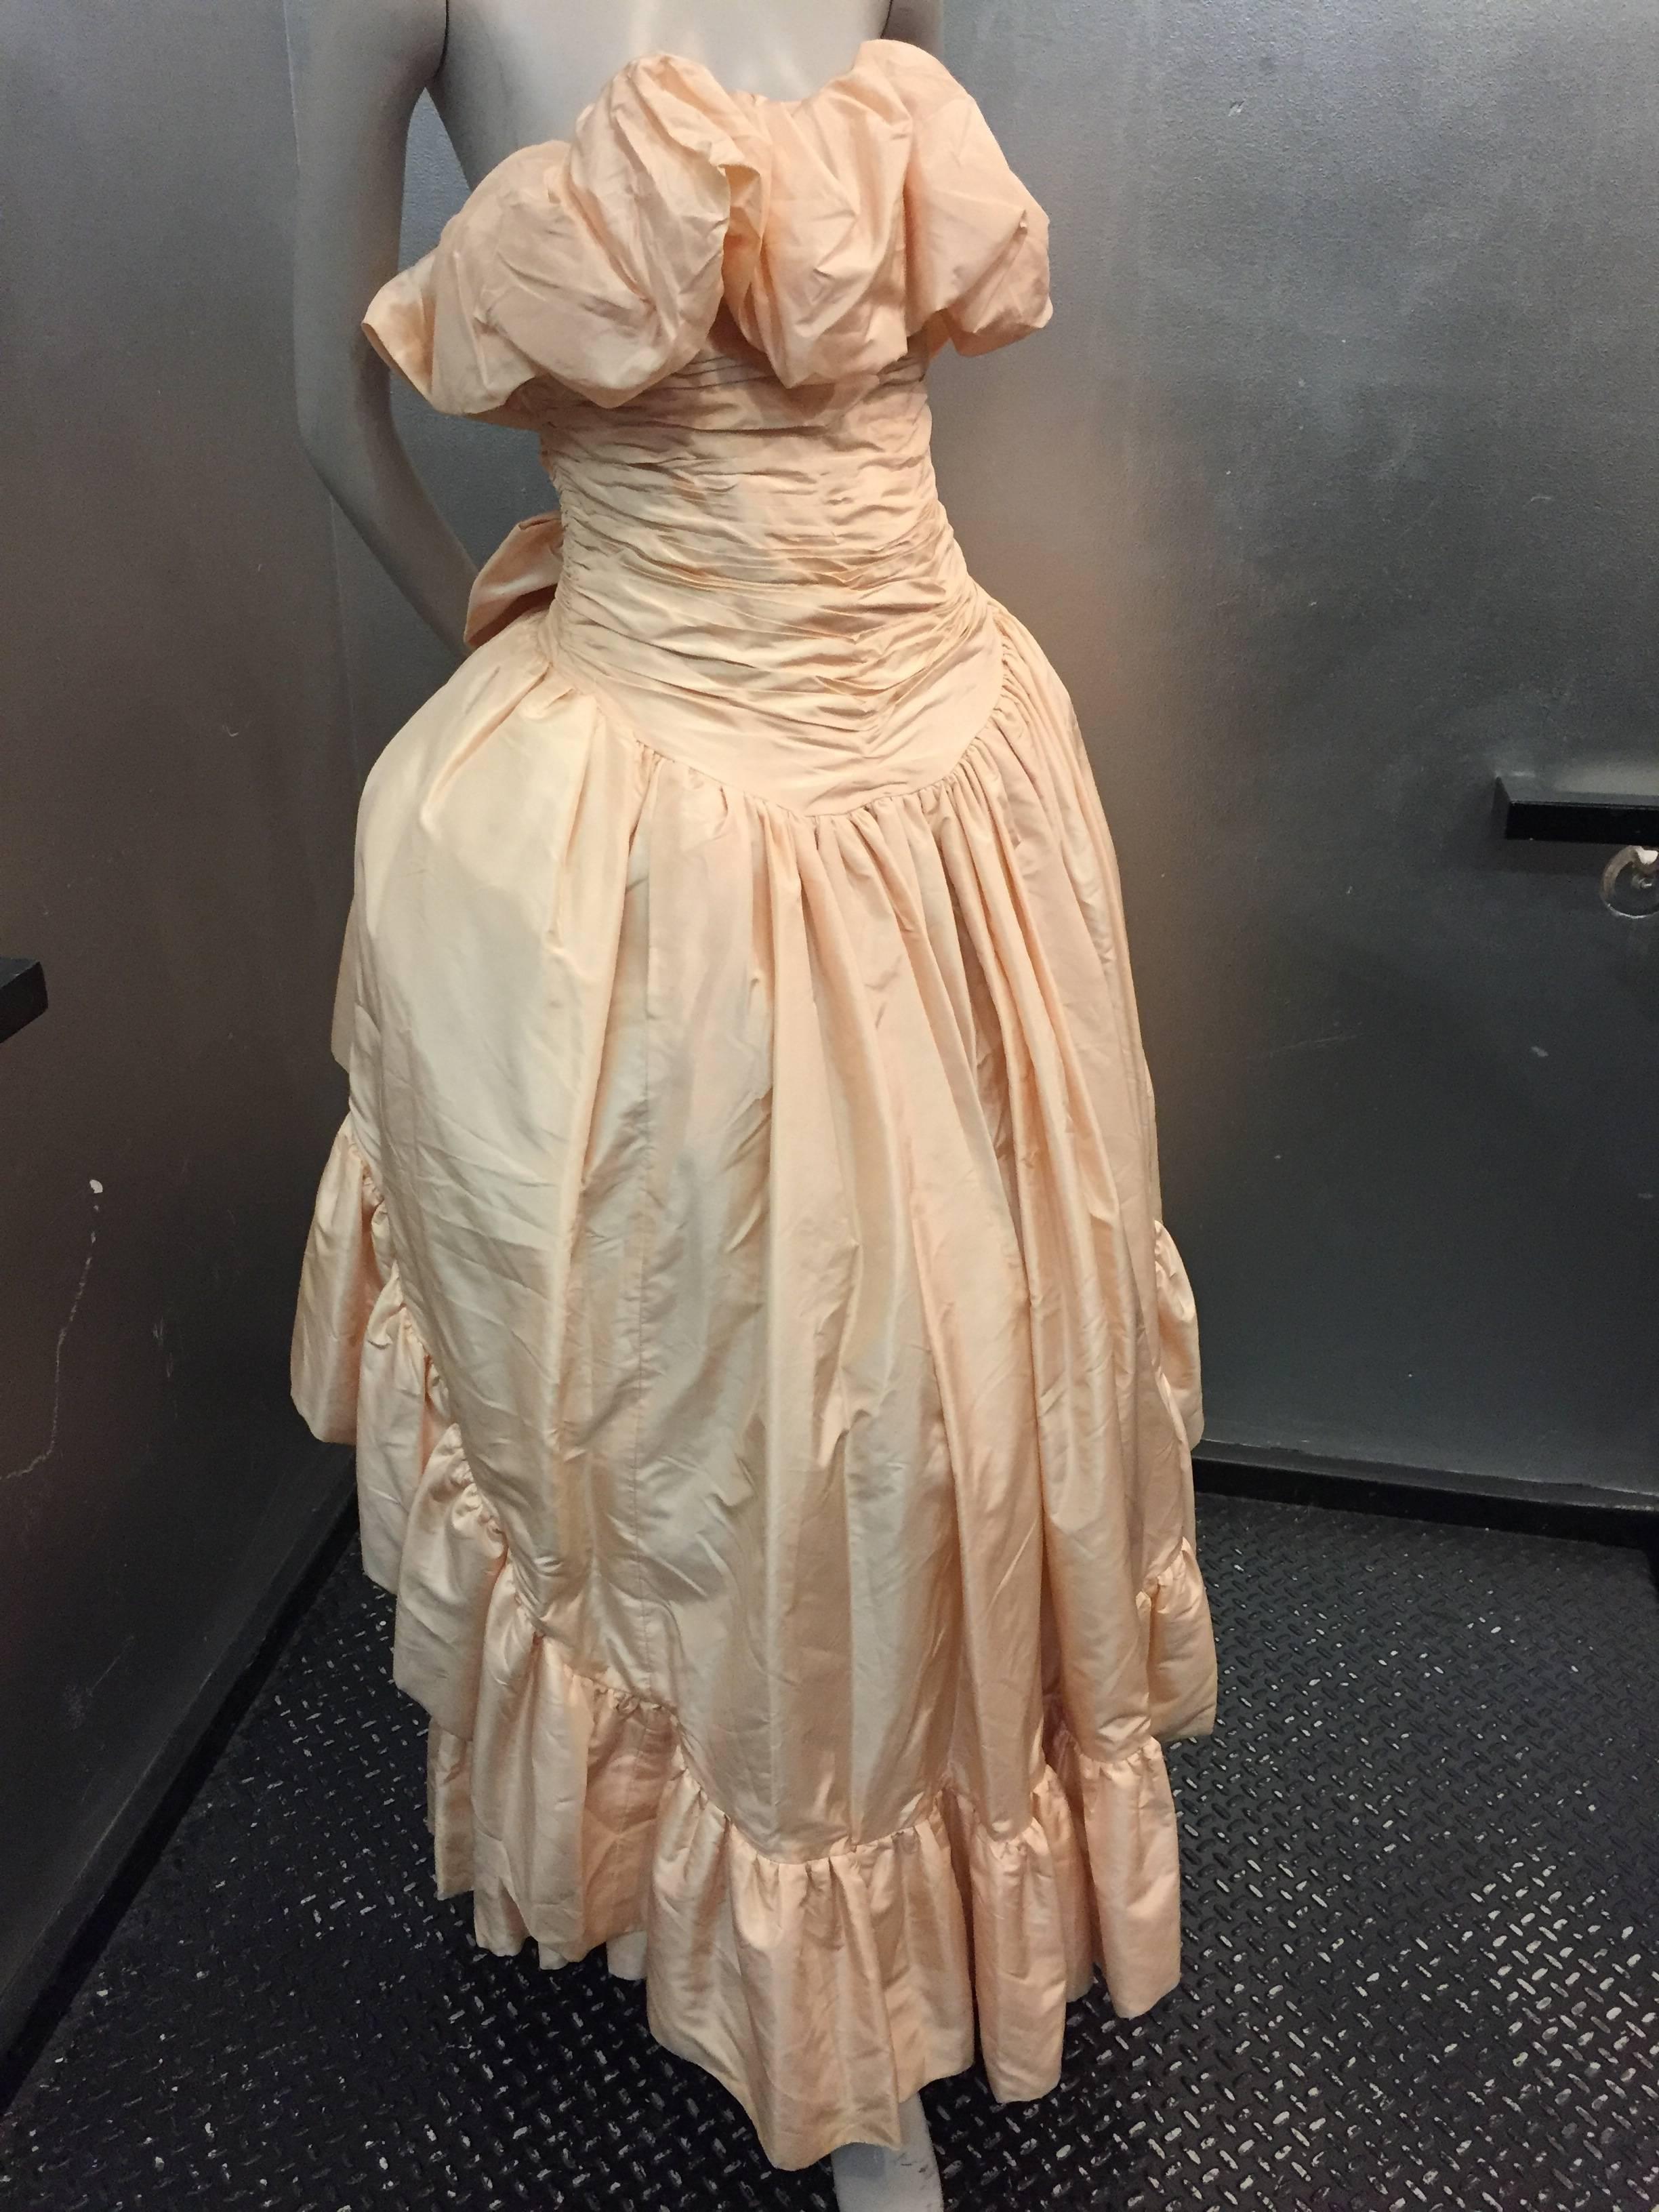 1980s Arnold Scaasi shell-pink tissue silk strapless ruffled ball gown with back bow. Very full skirt with gathered tulle crinoline under each tier of skirt. 